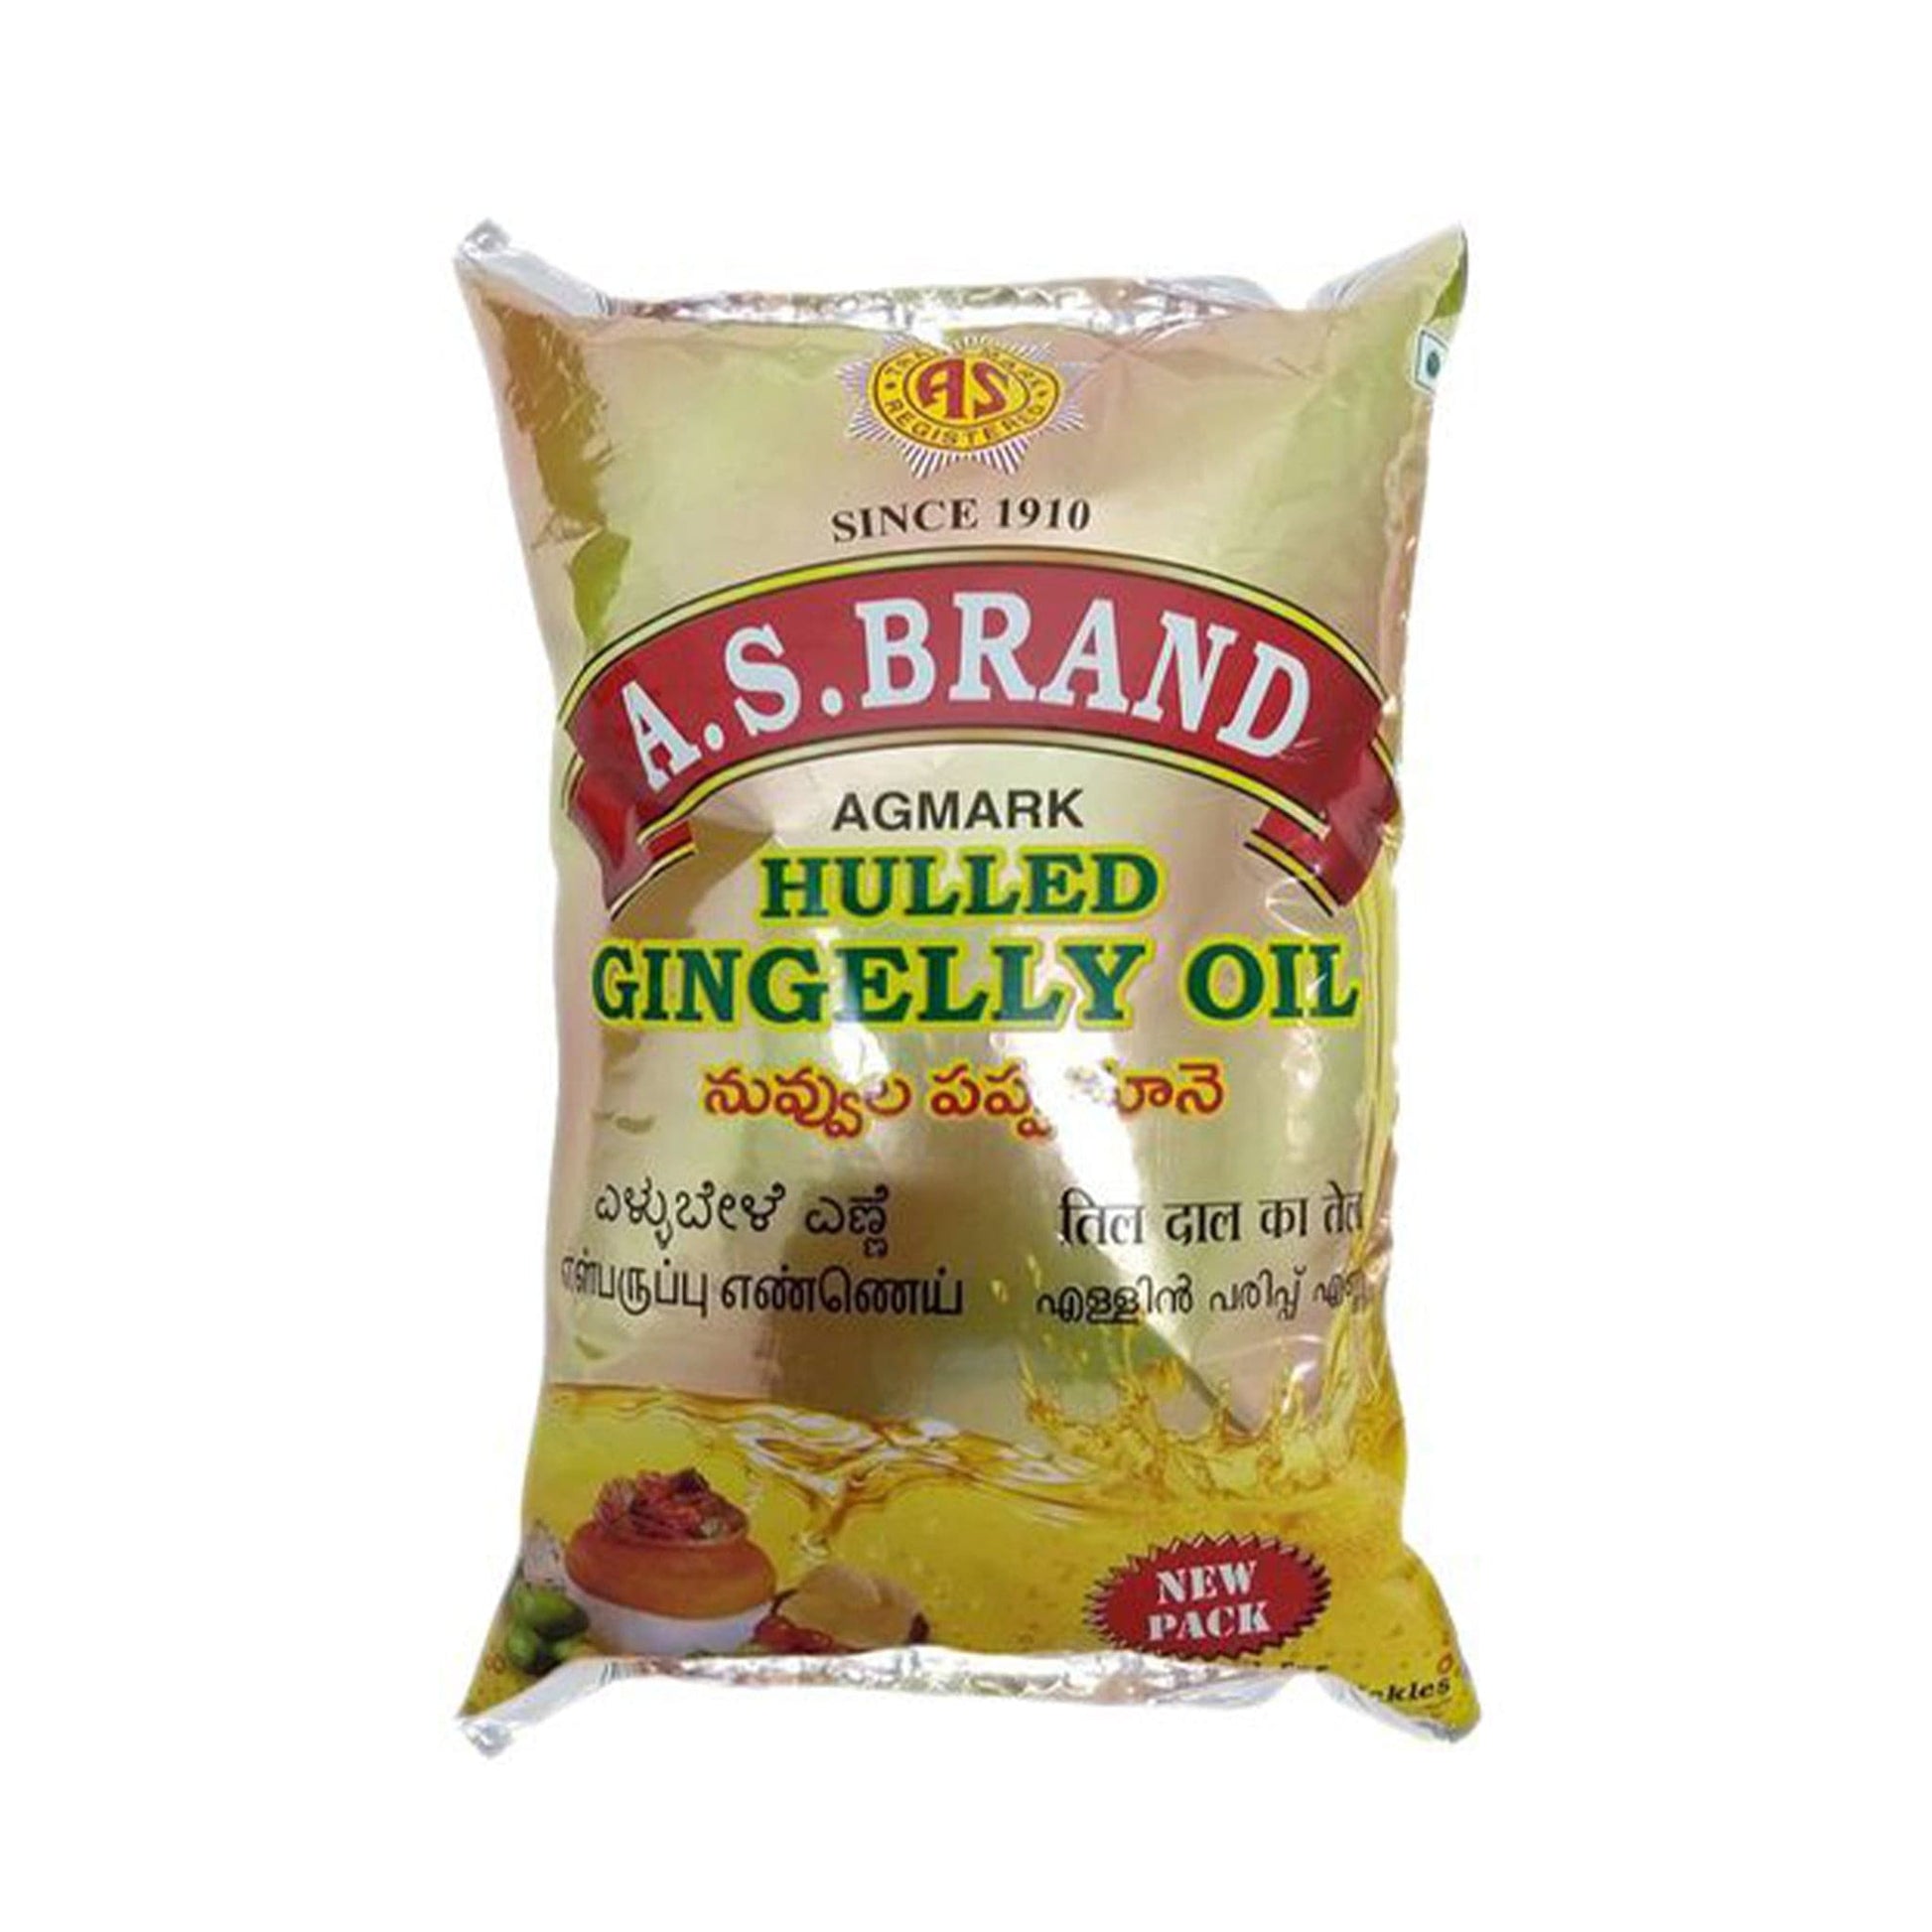 A S Brand Gingelly Oil.